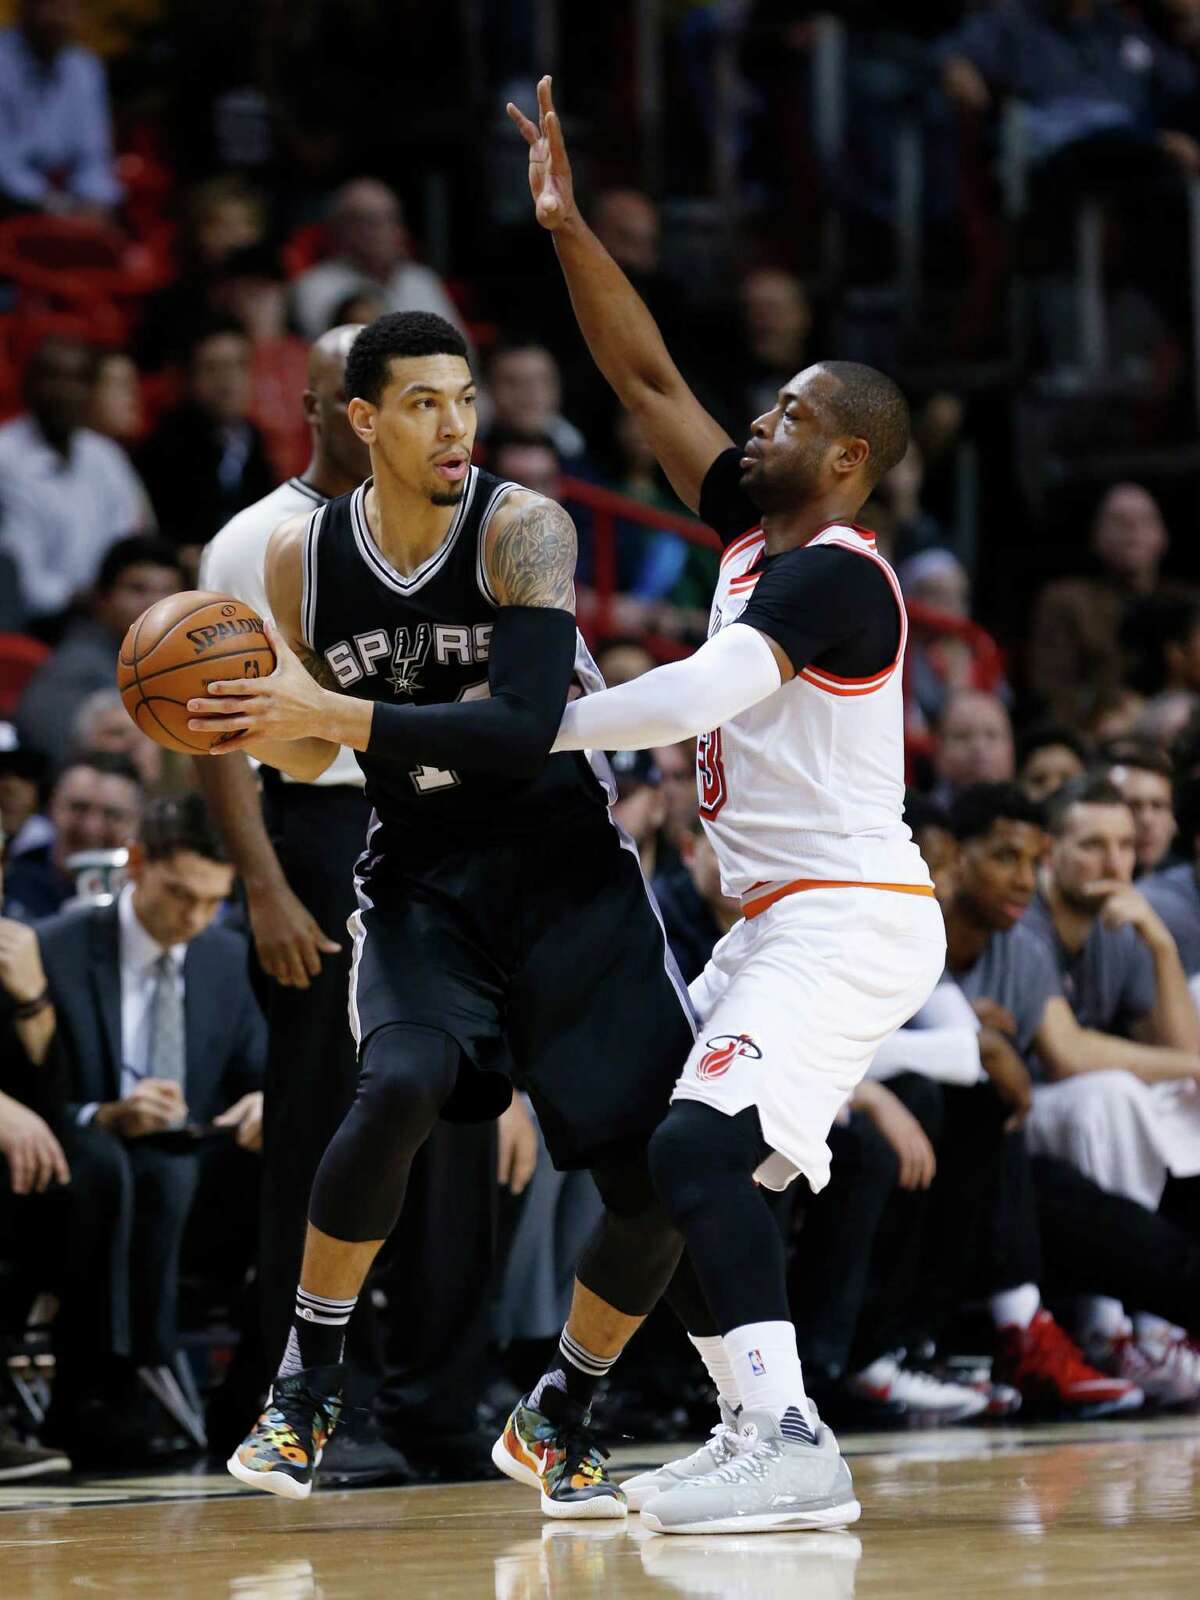 San Antonio Spurs guard Danny Green, left, looks for an open teammate past Miami Heat guard Dwyane Wade (3) during the first half of an NBA basketball game, Tuesday, Feb. 9, 2016, in Miami. (AP Photo/Wilfredo Lee)